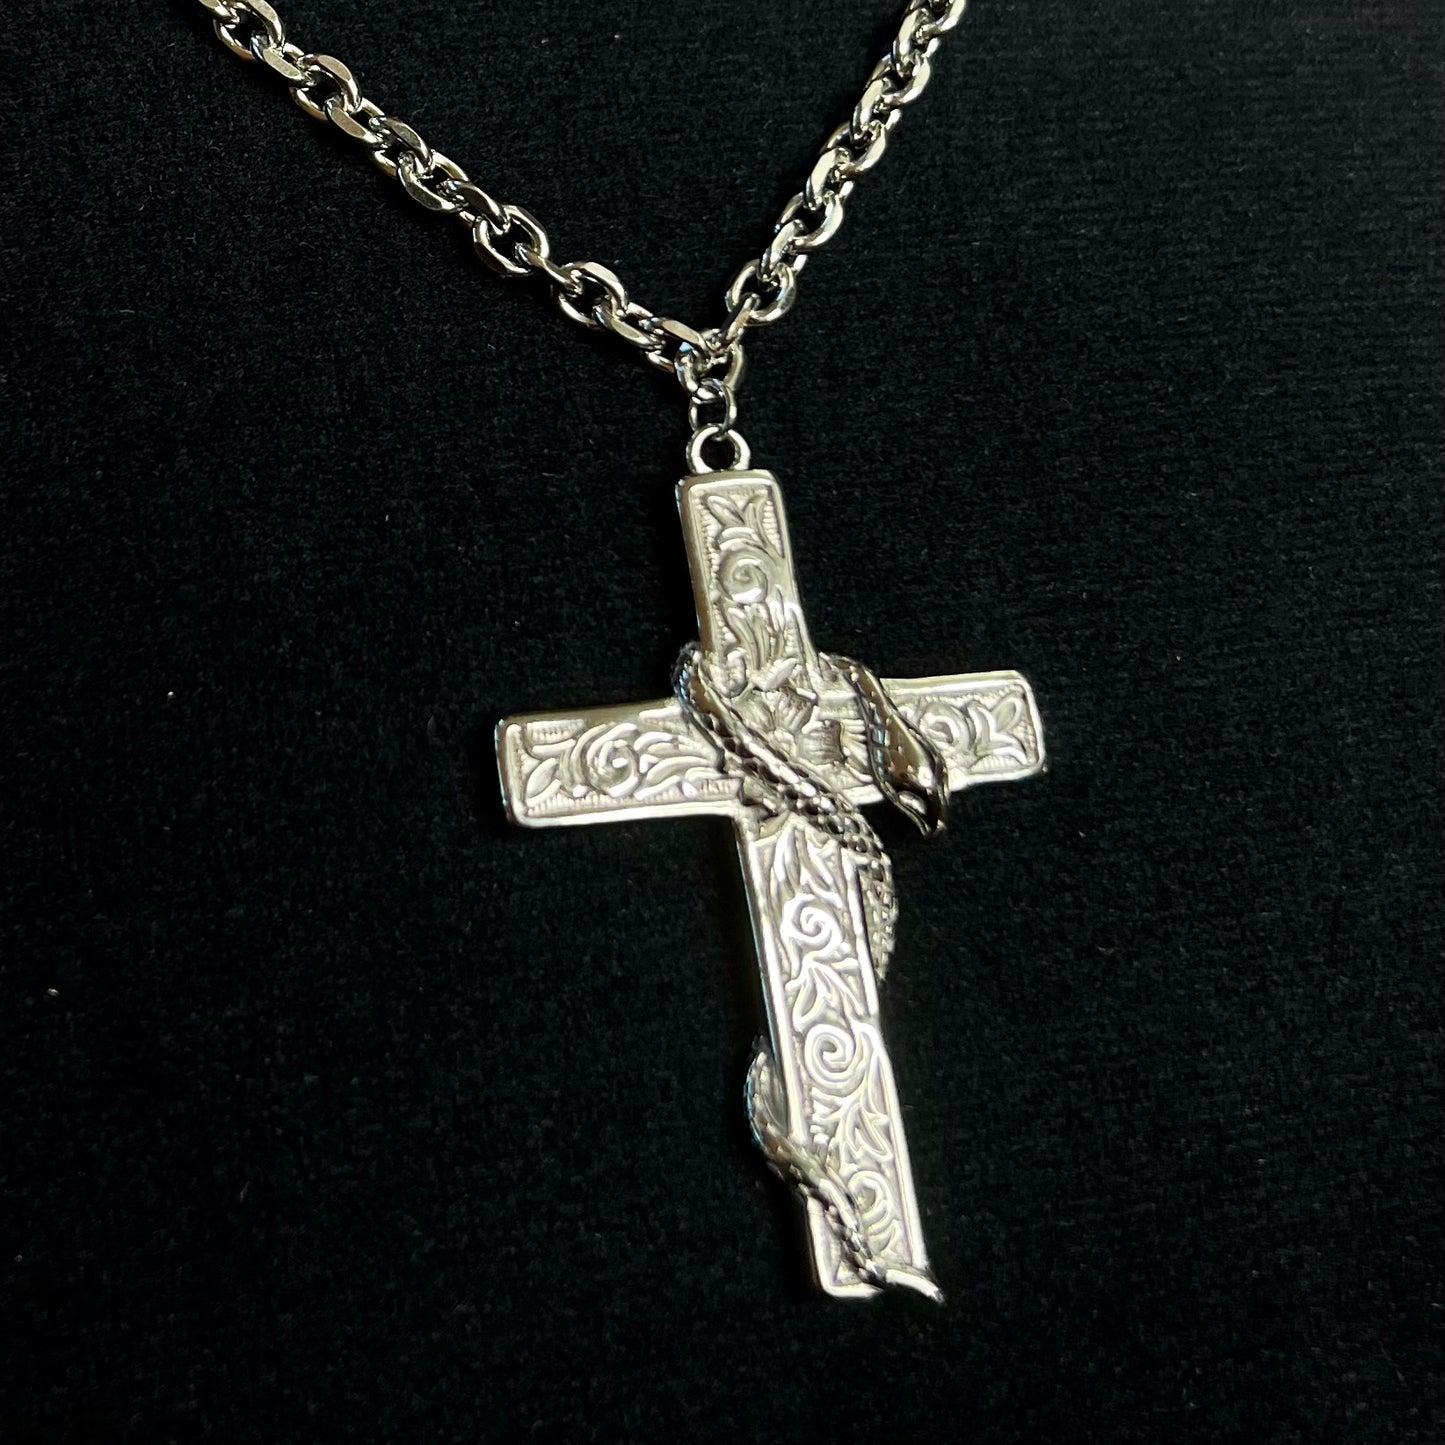 CRUCIFIED SERPENT NECKLACE